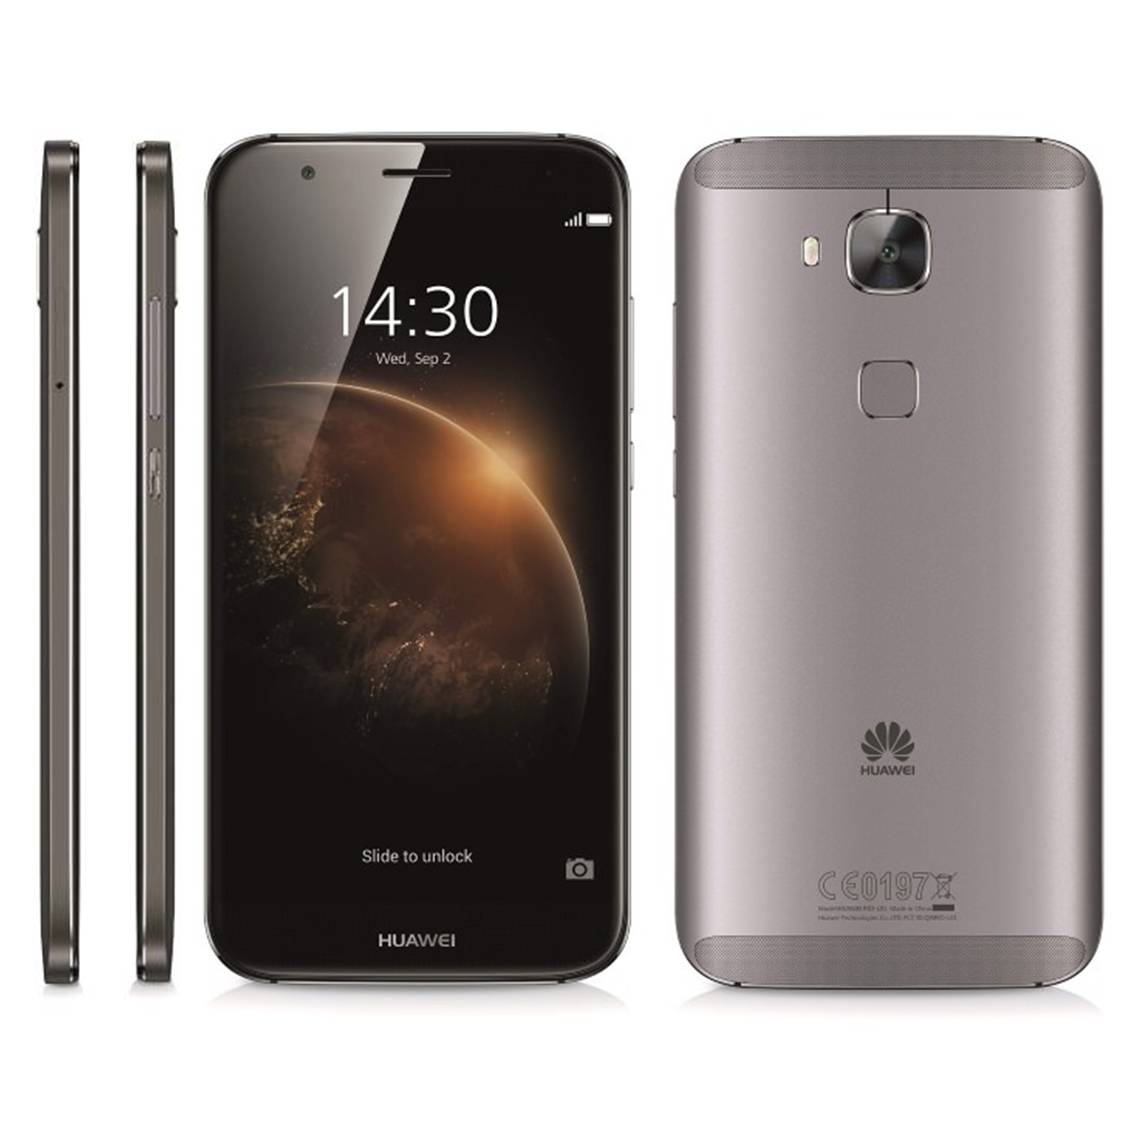  Huawei G8  Full Specifications MobileDevices com pk